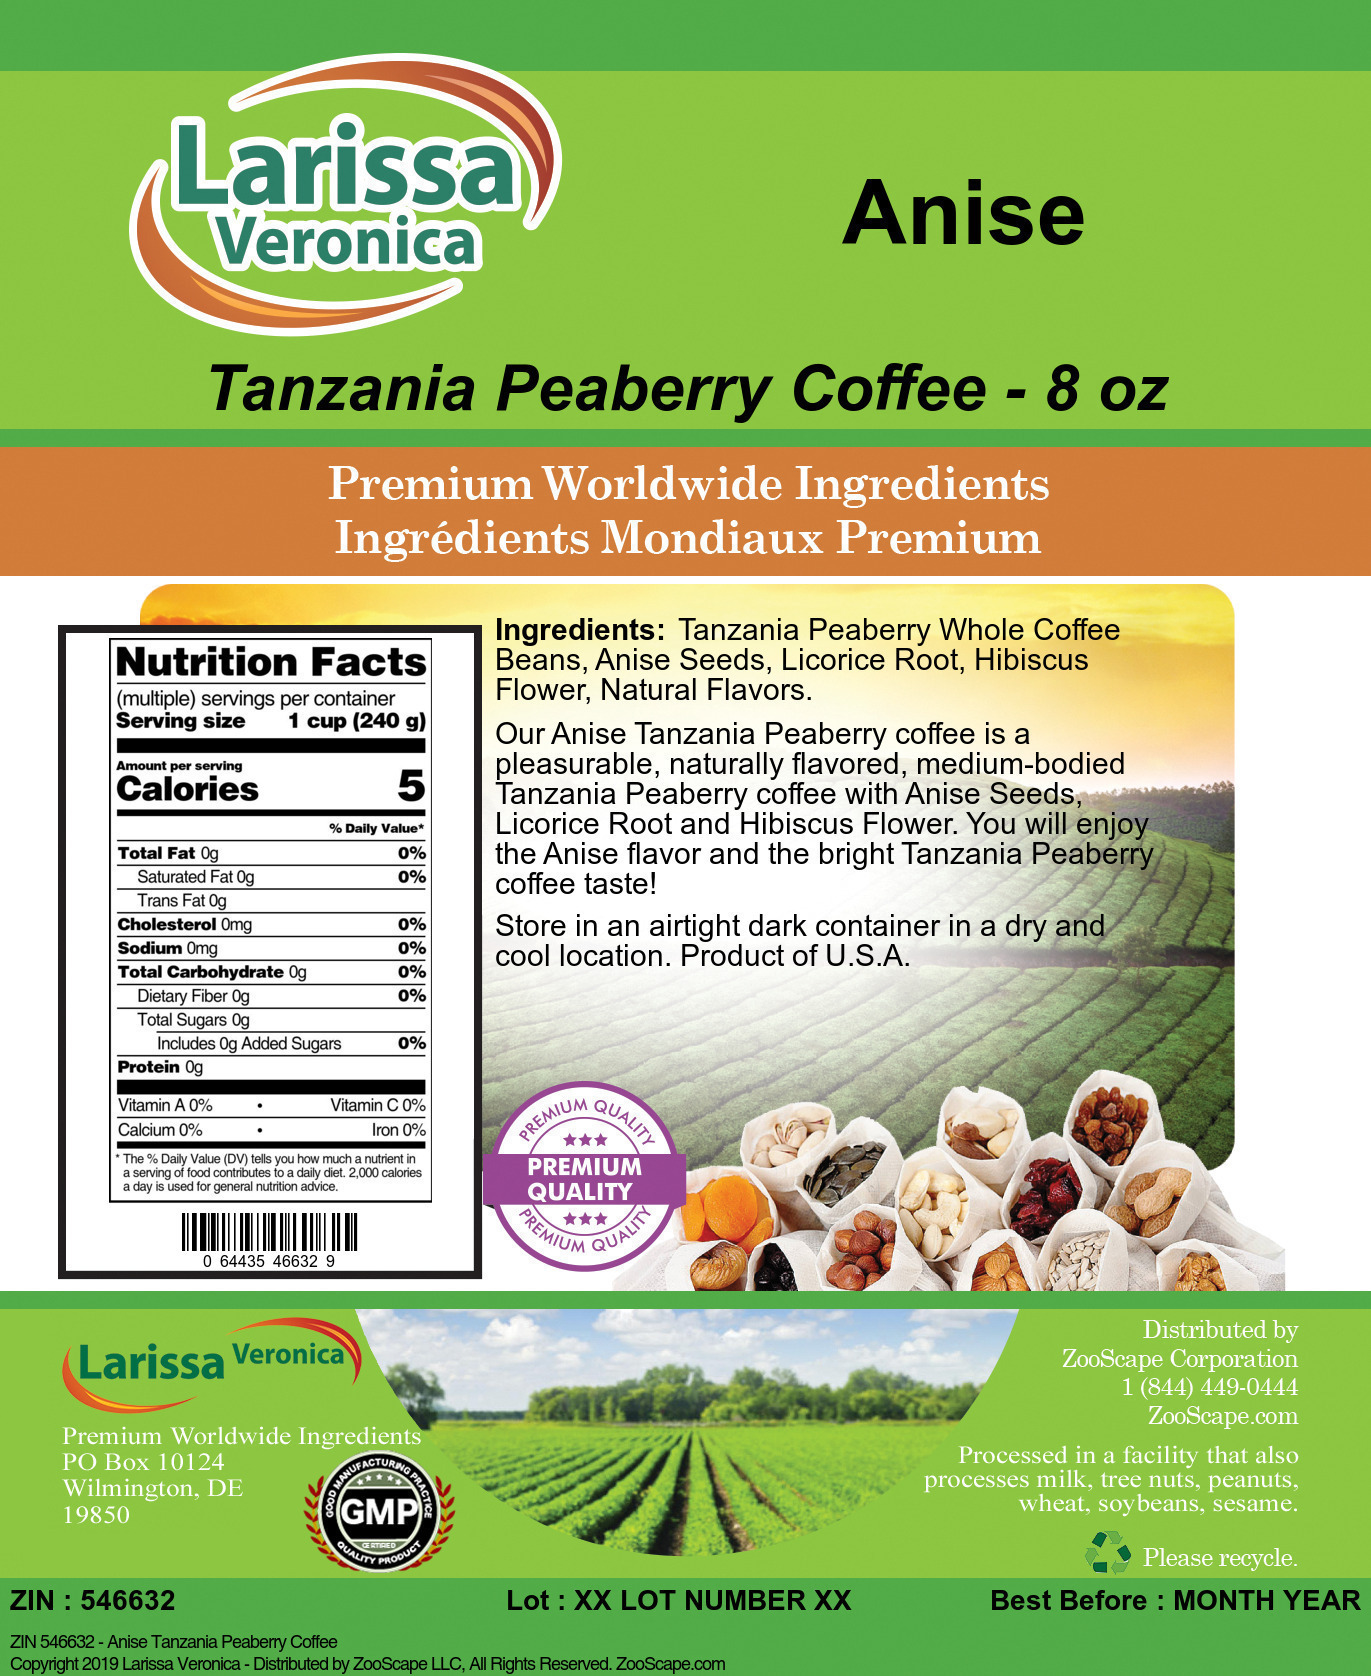 Anise Tanzania Peaberry Coffee - Label